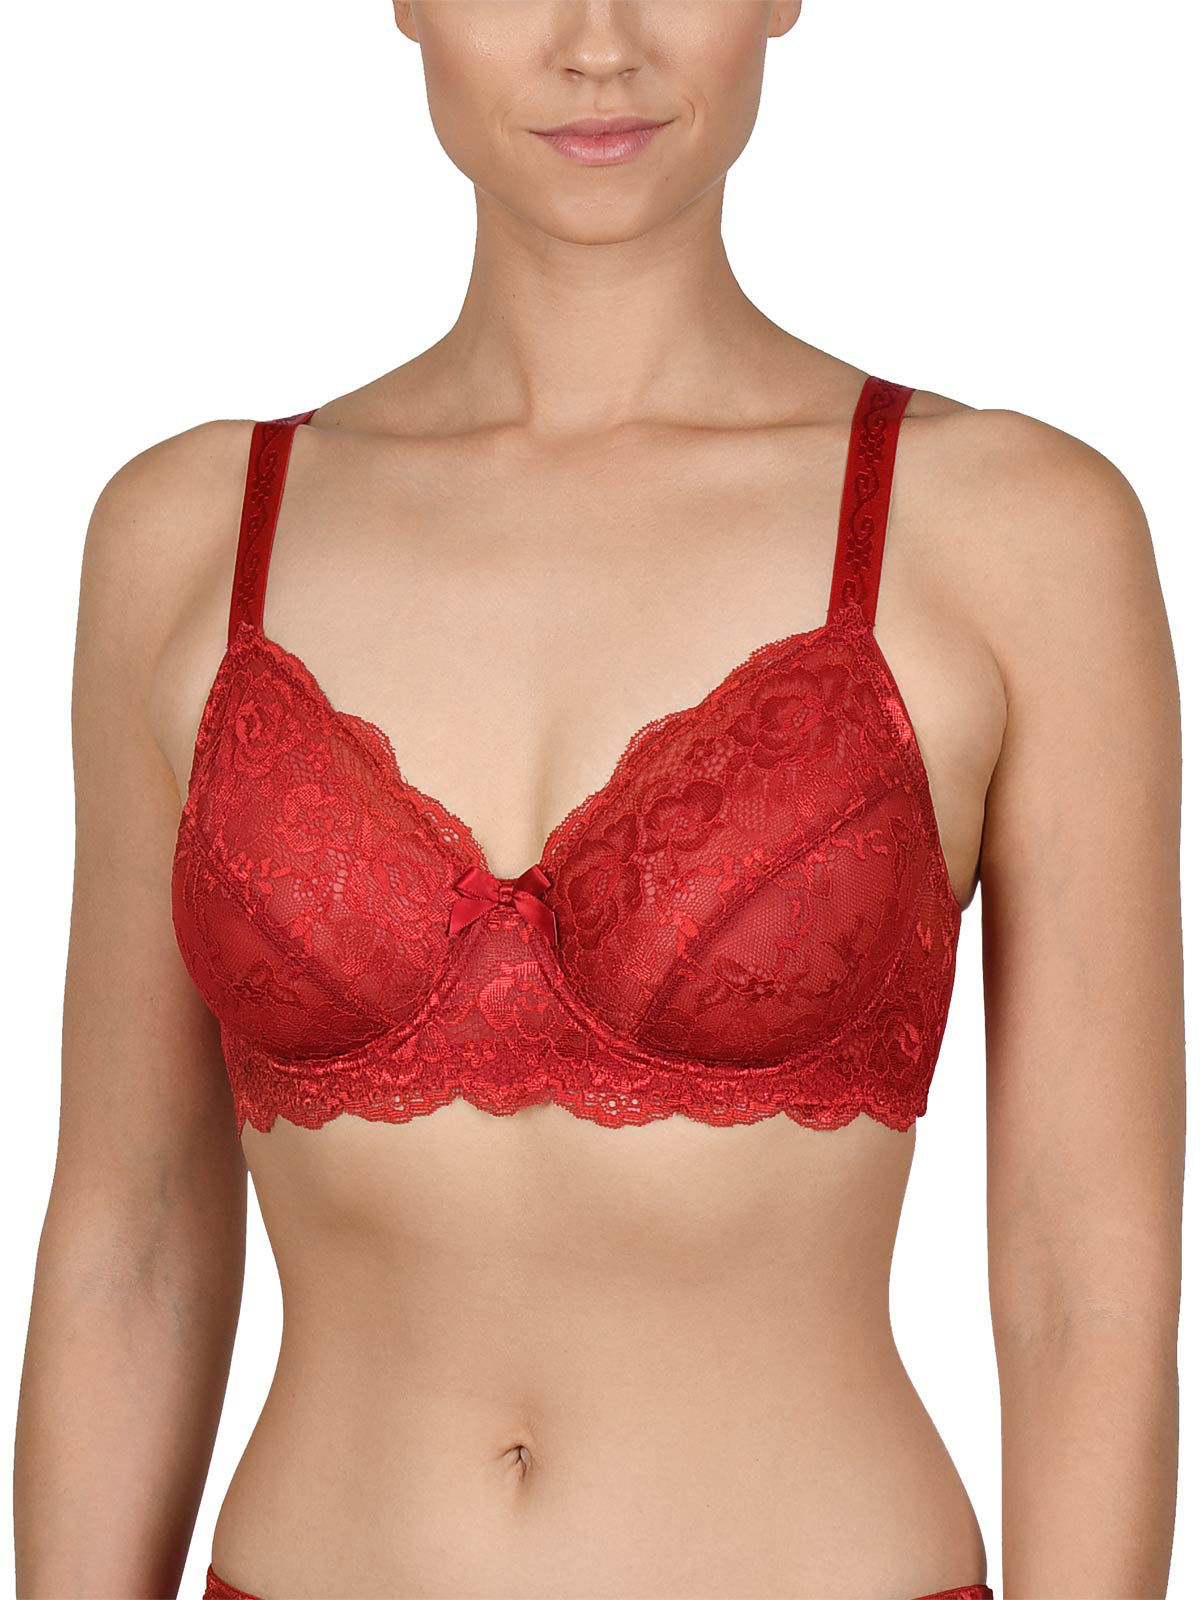 Naturana - - Naturana, Cybele ASSORTED Soft Cup Bras - Size 34 to 44 (B cup)